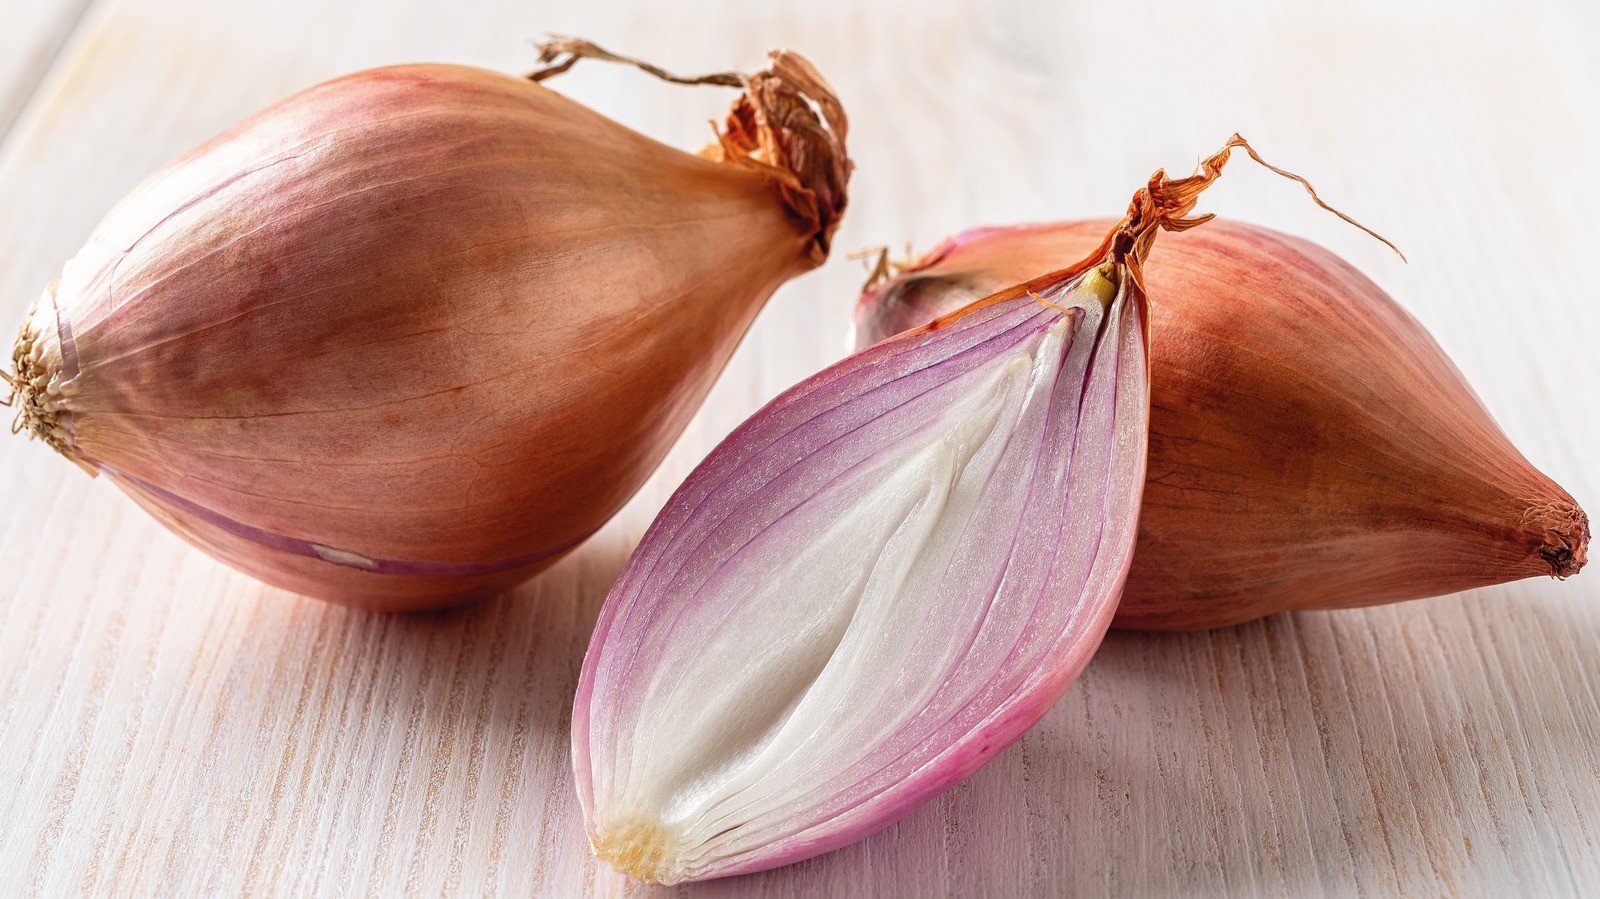 What's The Best Substitute To Use For Shallots?